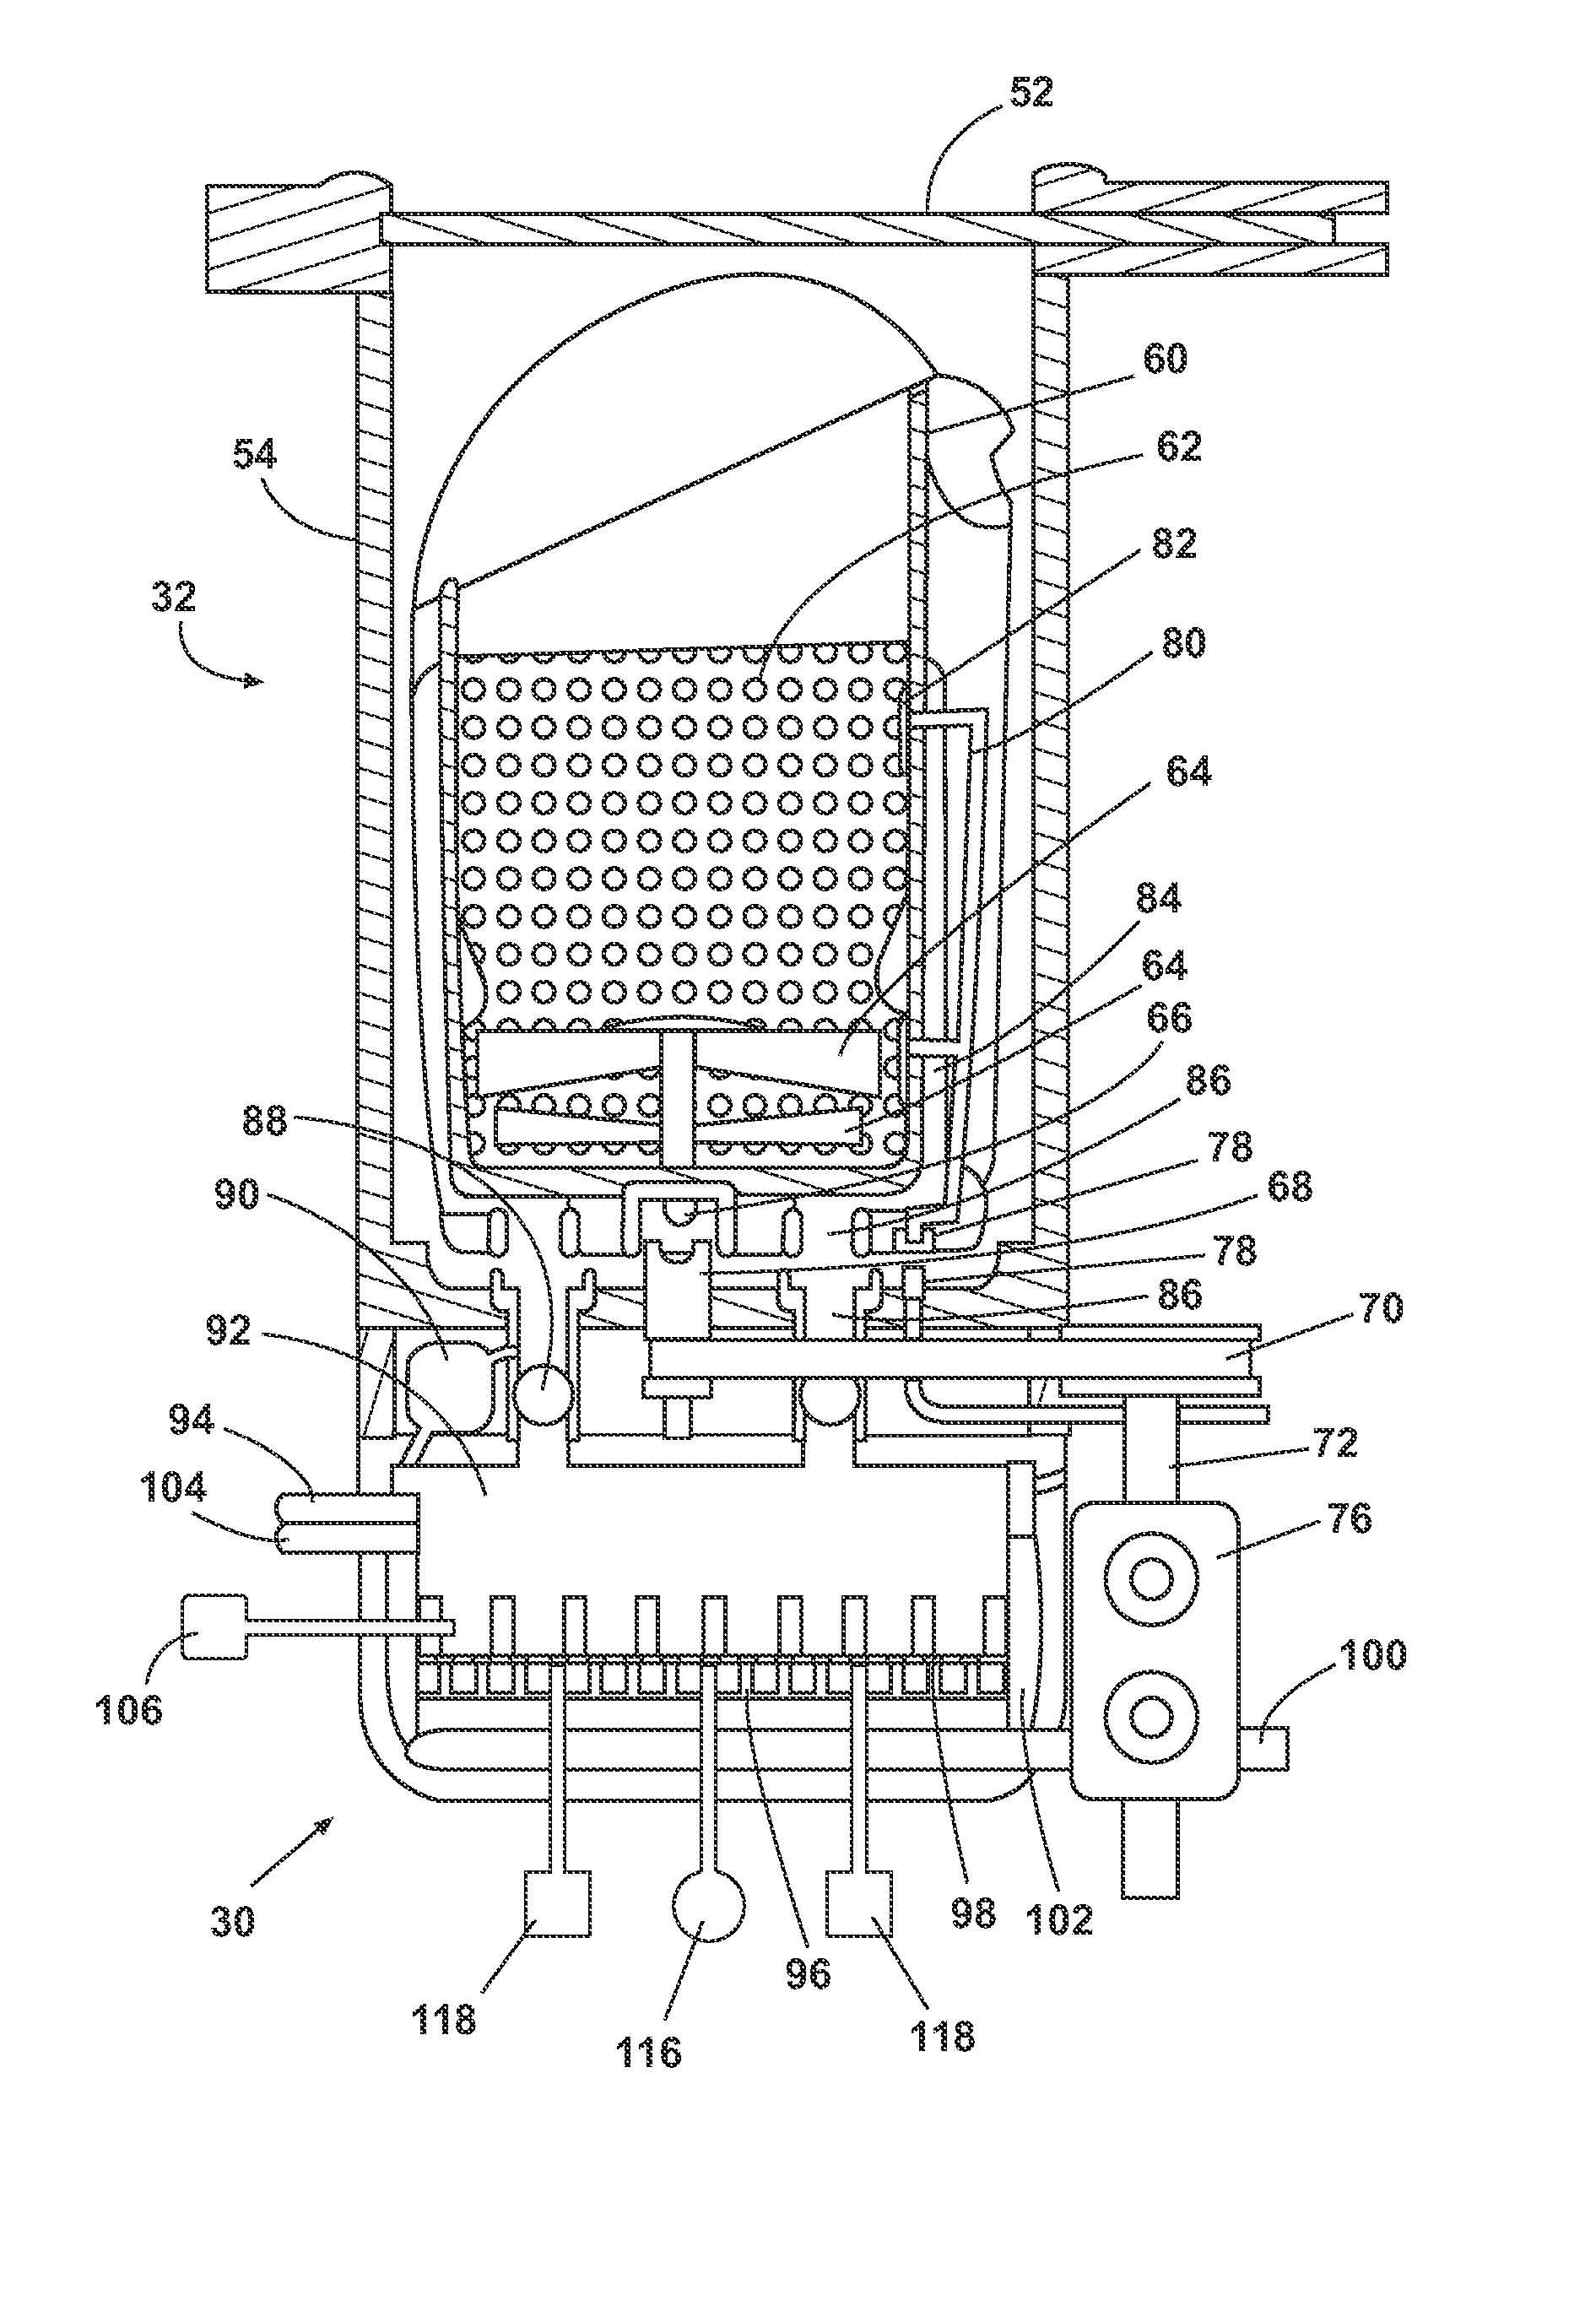 Device and Process for Processing Organic Waste